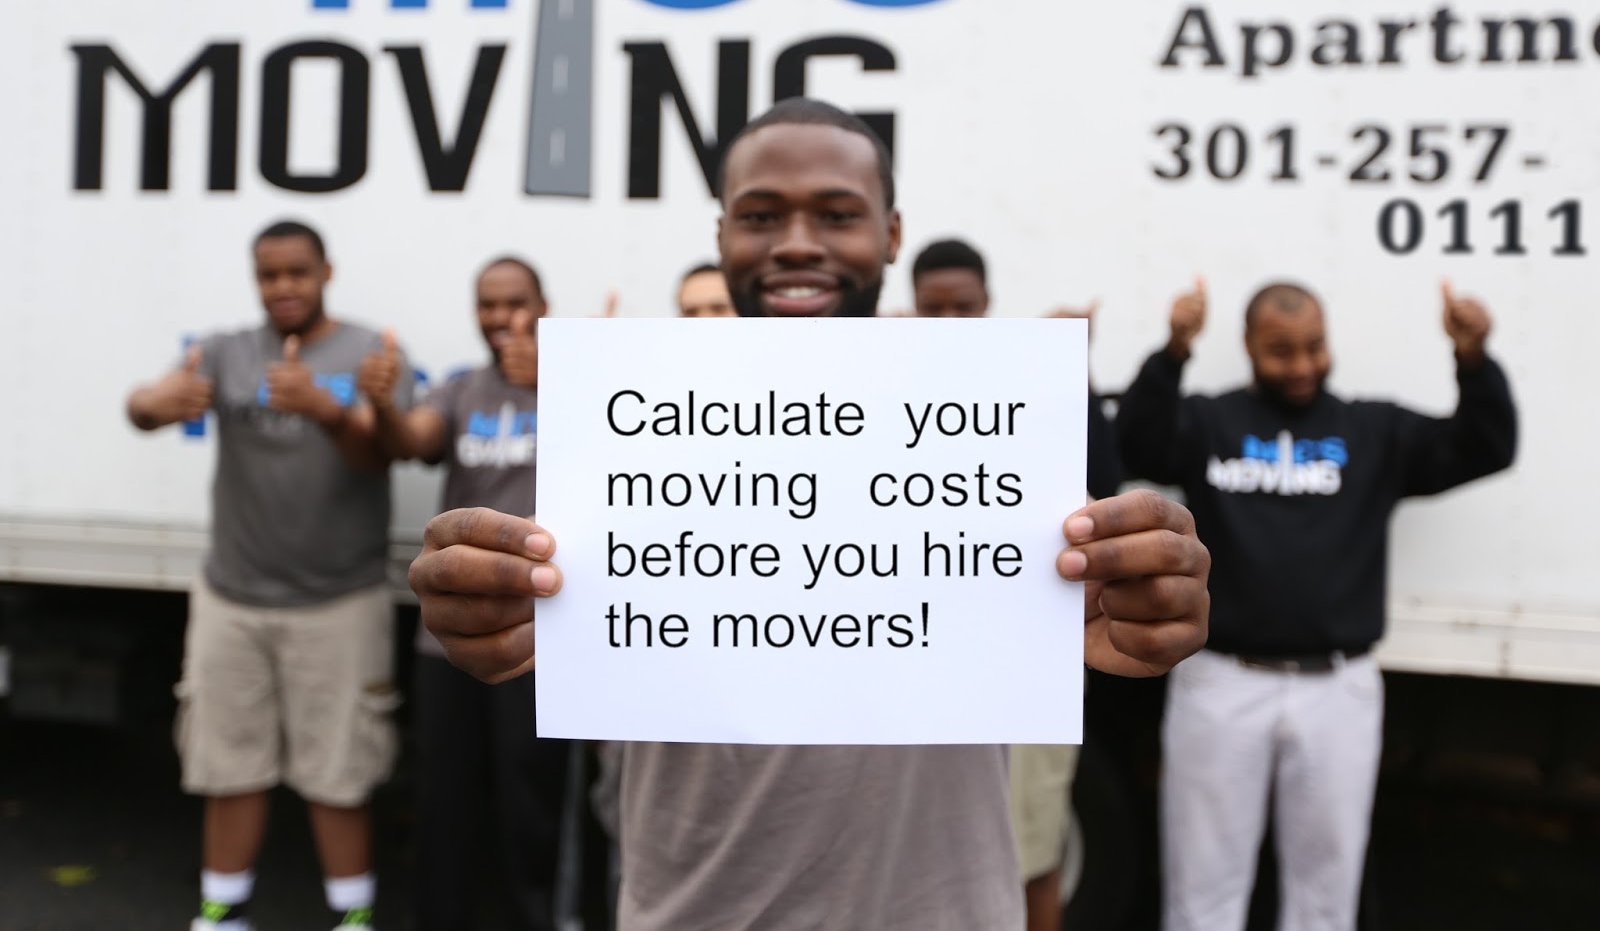 Find out your moving cost before you move